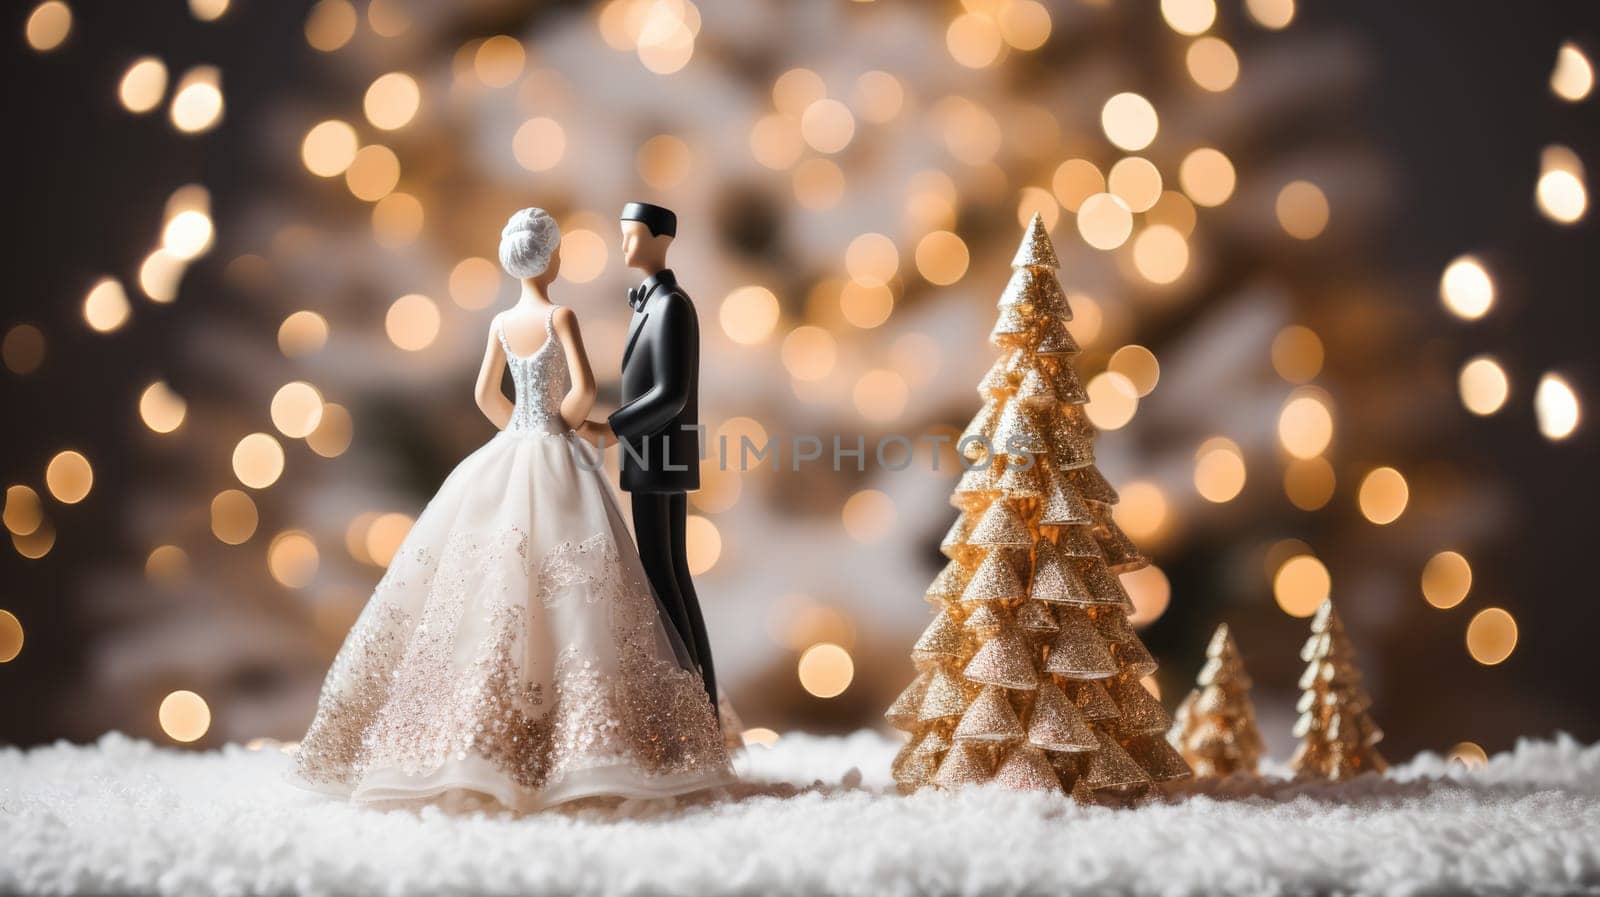 Toy figures of bride and groom. Christmas wedding, blurred Christmas background by natali_brill